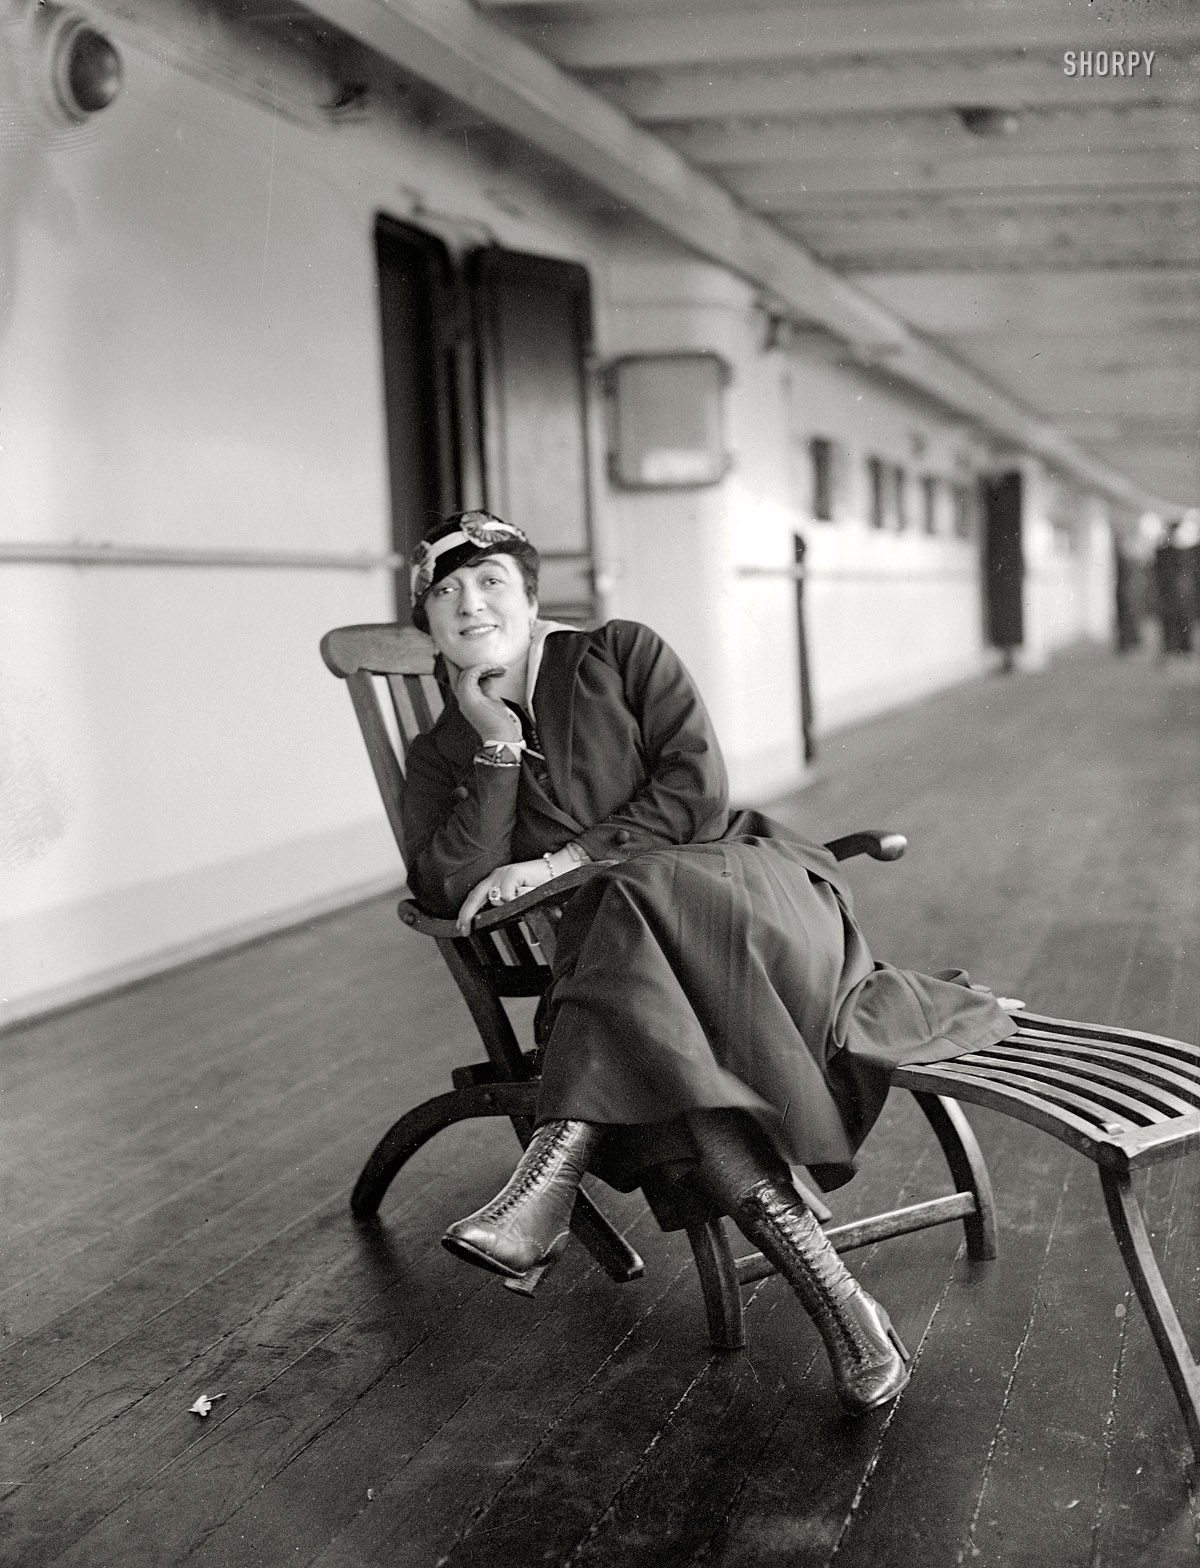 New York circa 1915. "Mme. De Luza aboard ship." Ready for some serious relaxing. 5x7 glass negative, George Grantham Bain Collection. View full size.